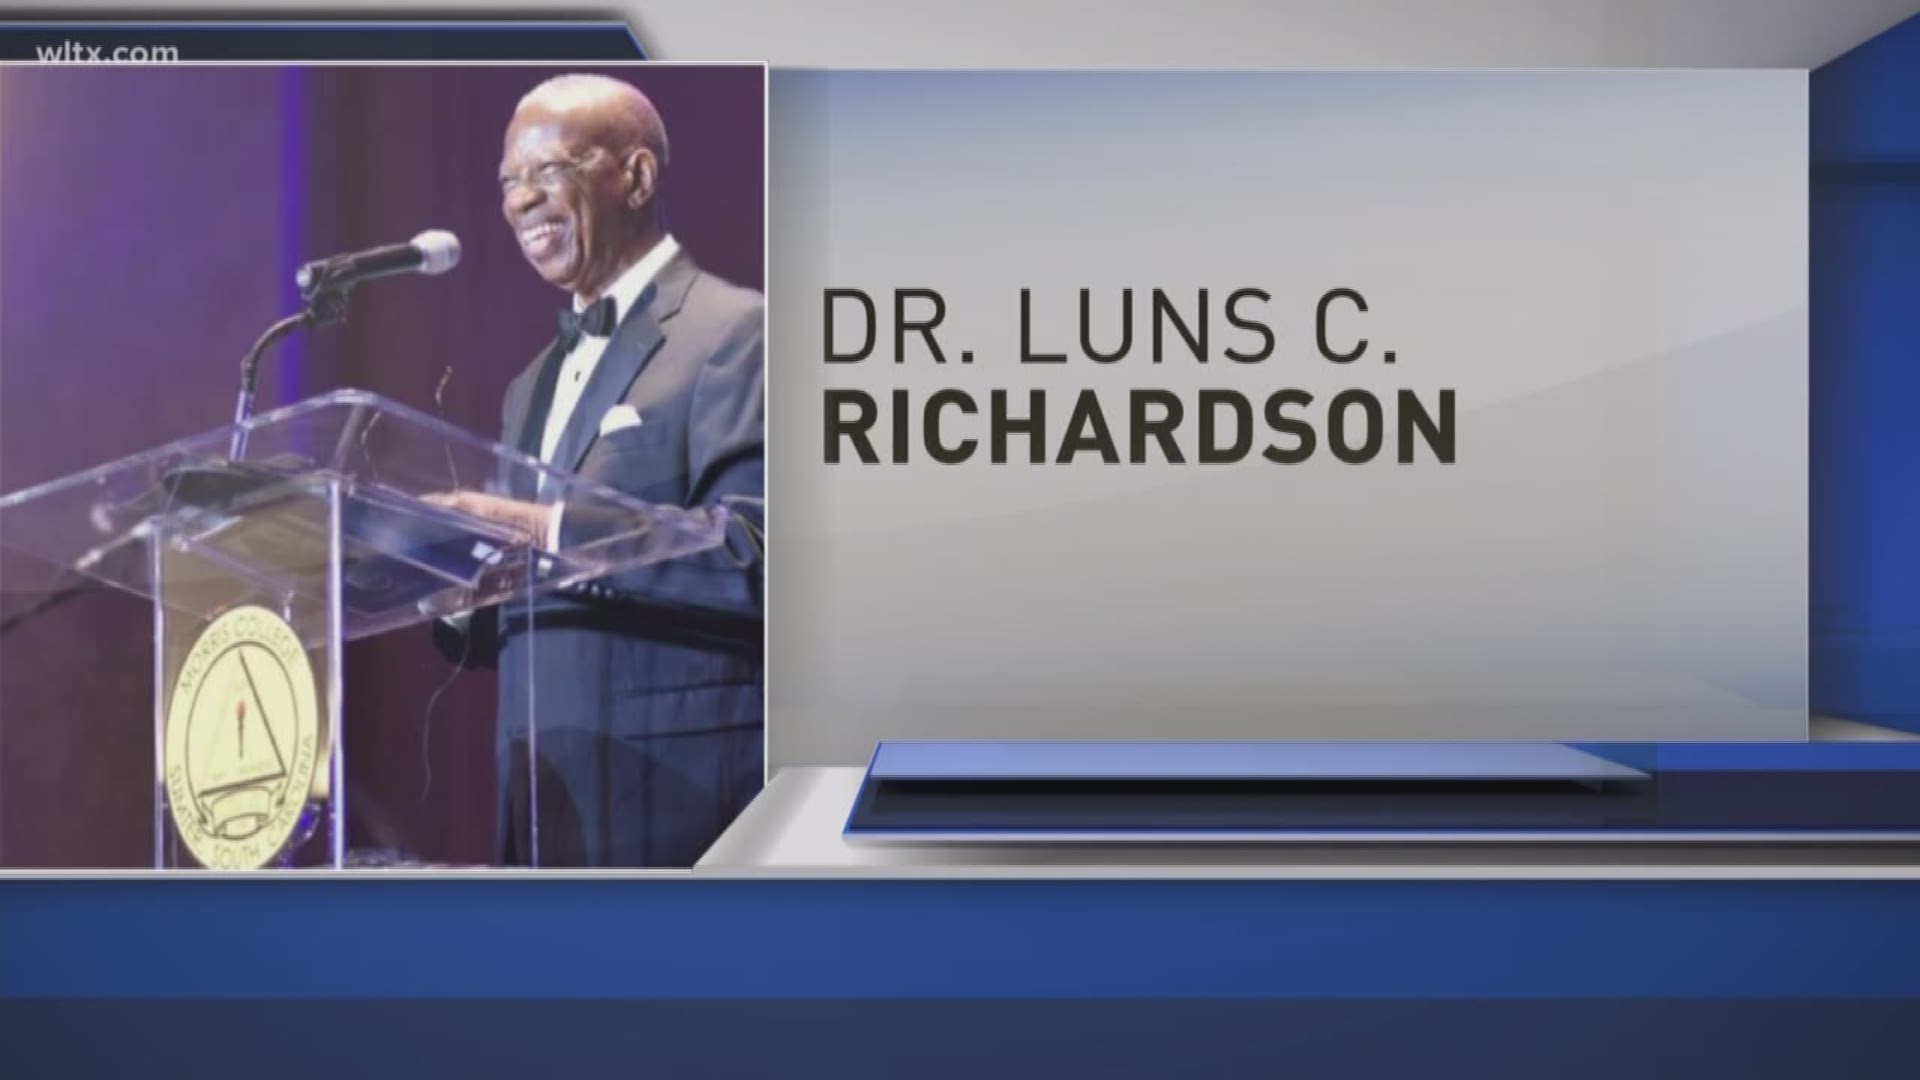 Dr. Luns C. Richardson died on Saturday at the age of 89.